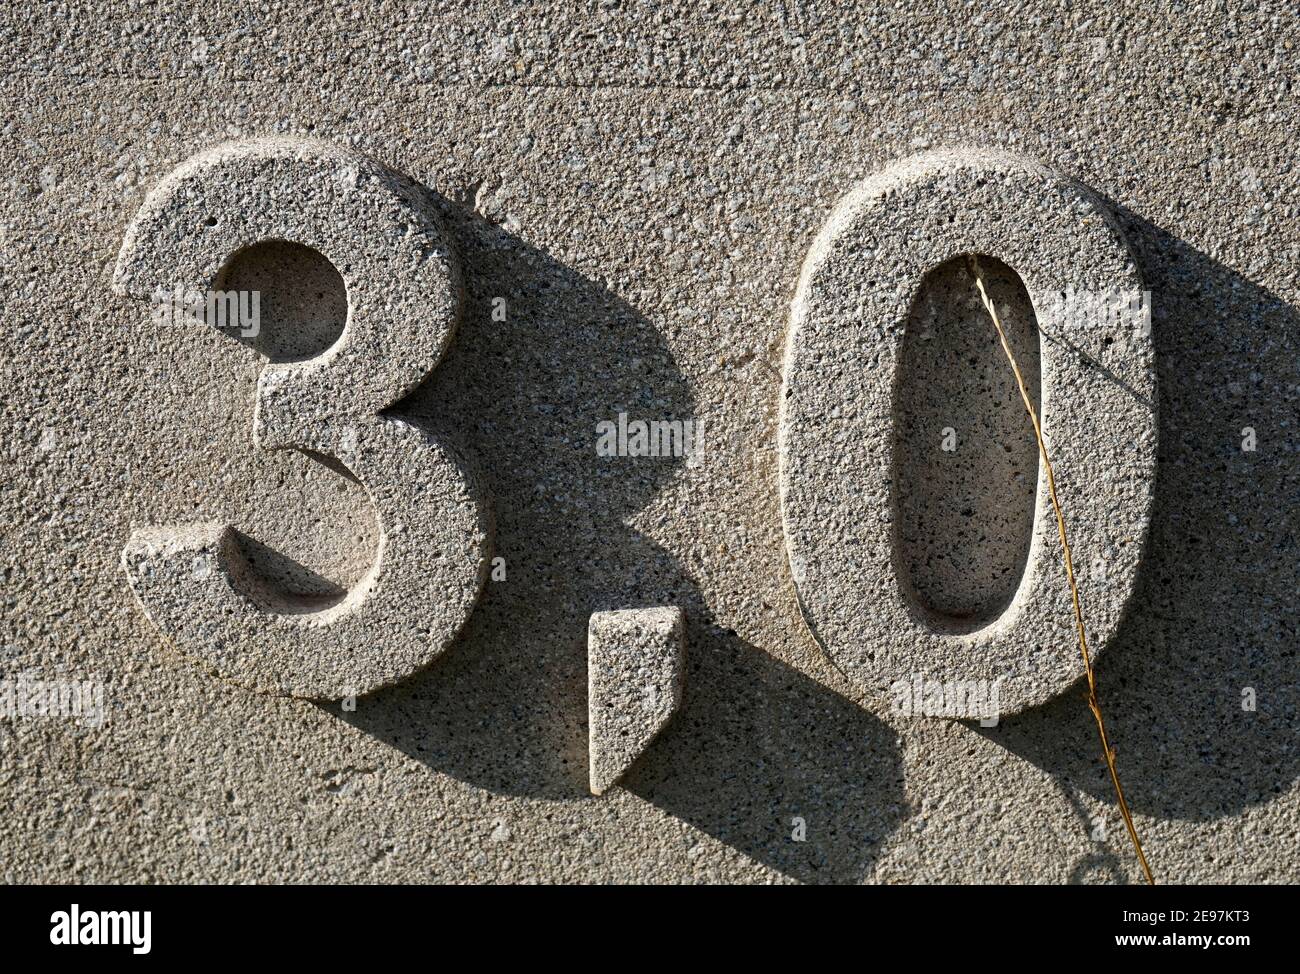 '3.0' seen on a grey German wall. The comma is used in Europe to show the decimal point. Stock Photo